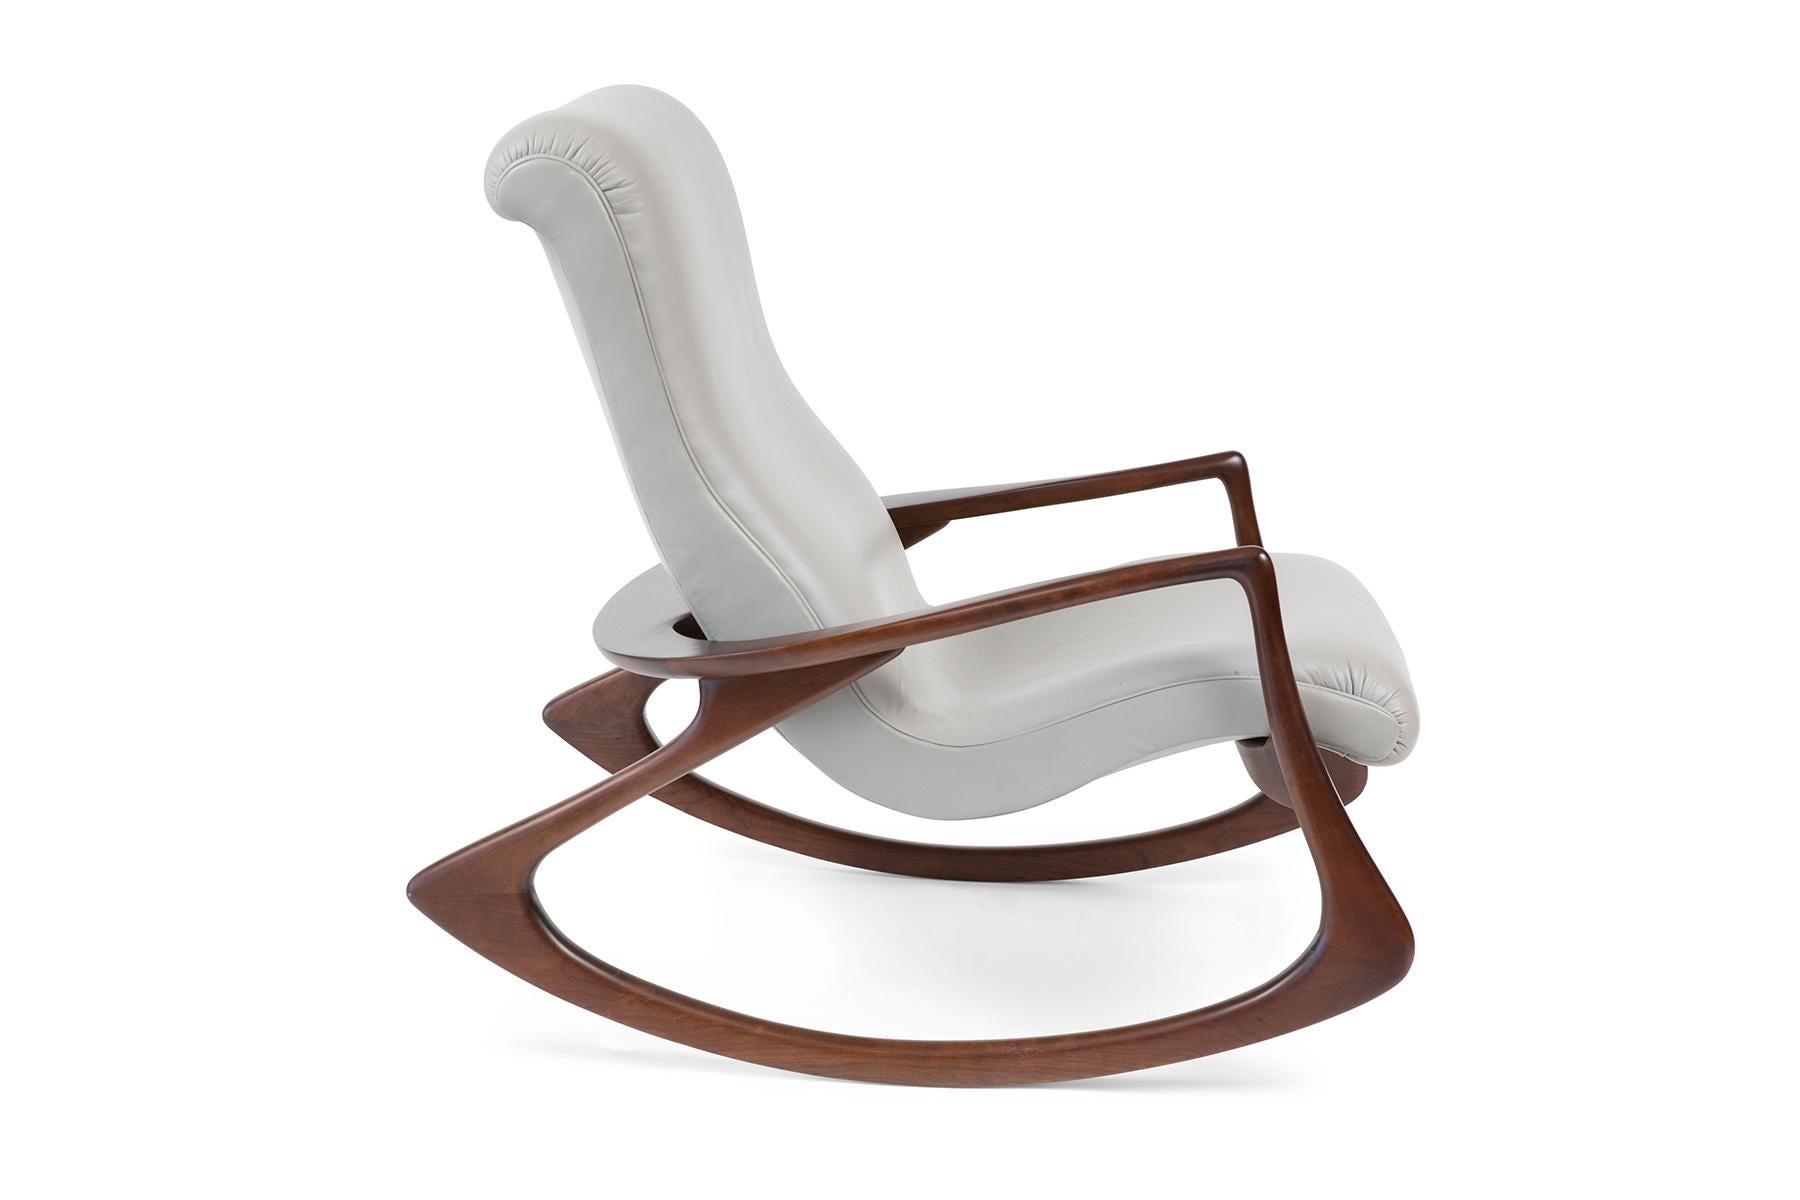 This iconic contour rocking chair was originally conceived by designer Vladimir Kagan in 1953. This example dating from the early 1970’s features a gorgeously sculpted walnut frame and supple light grey leather upholstery.